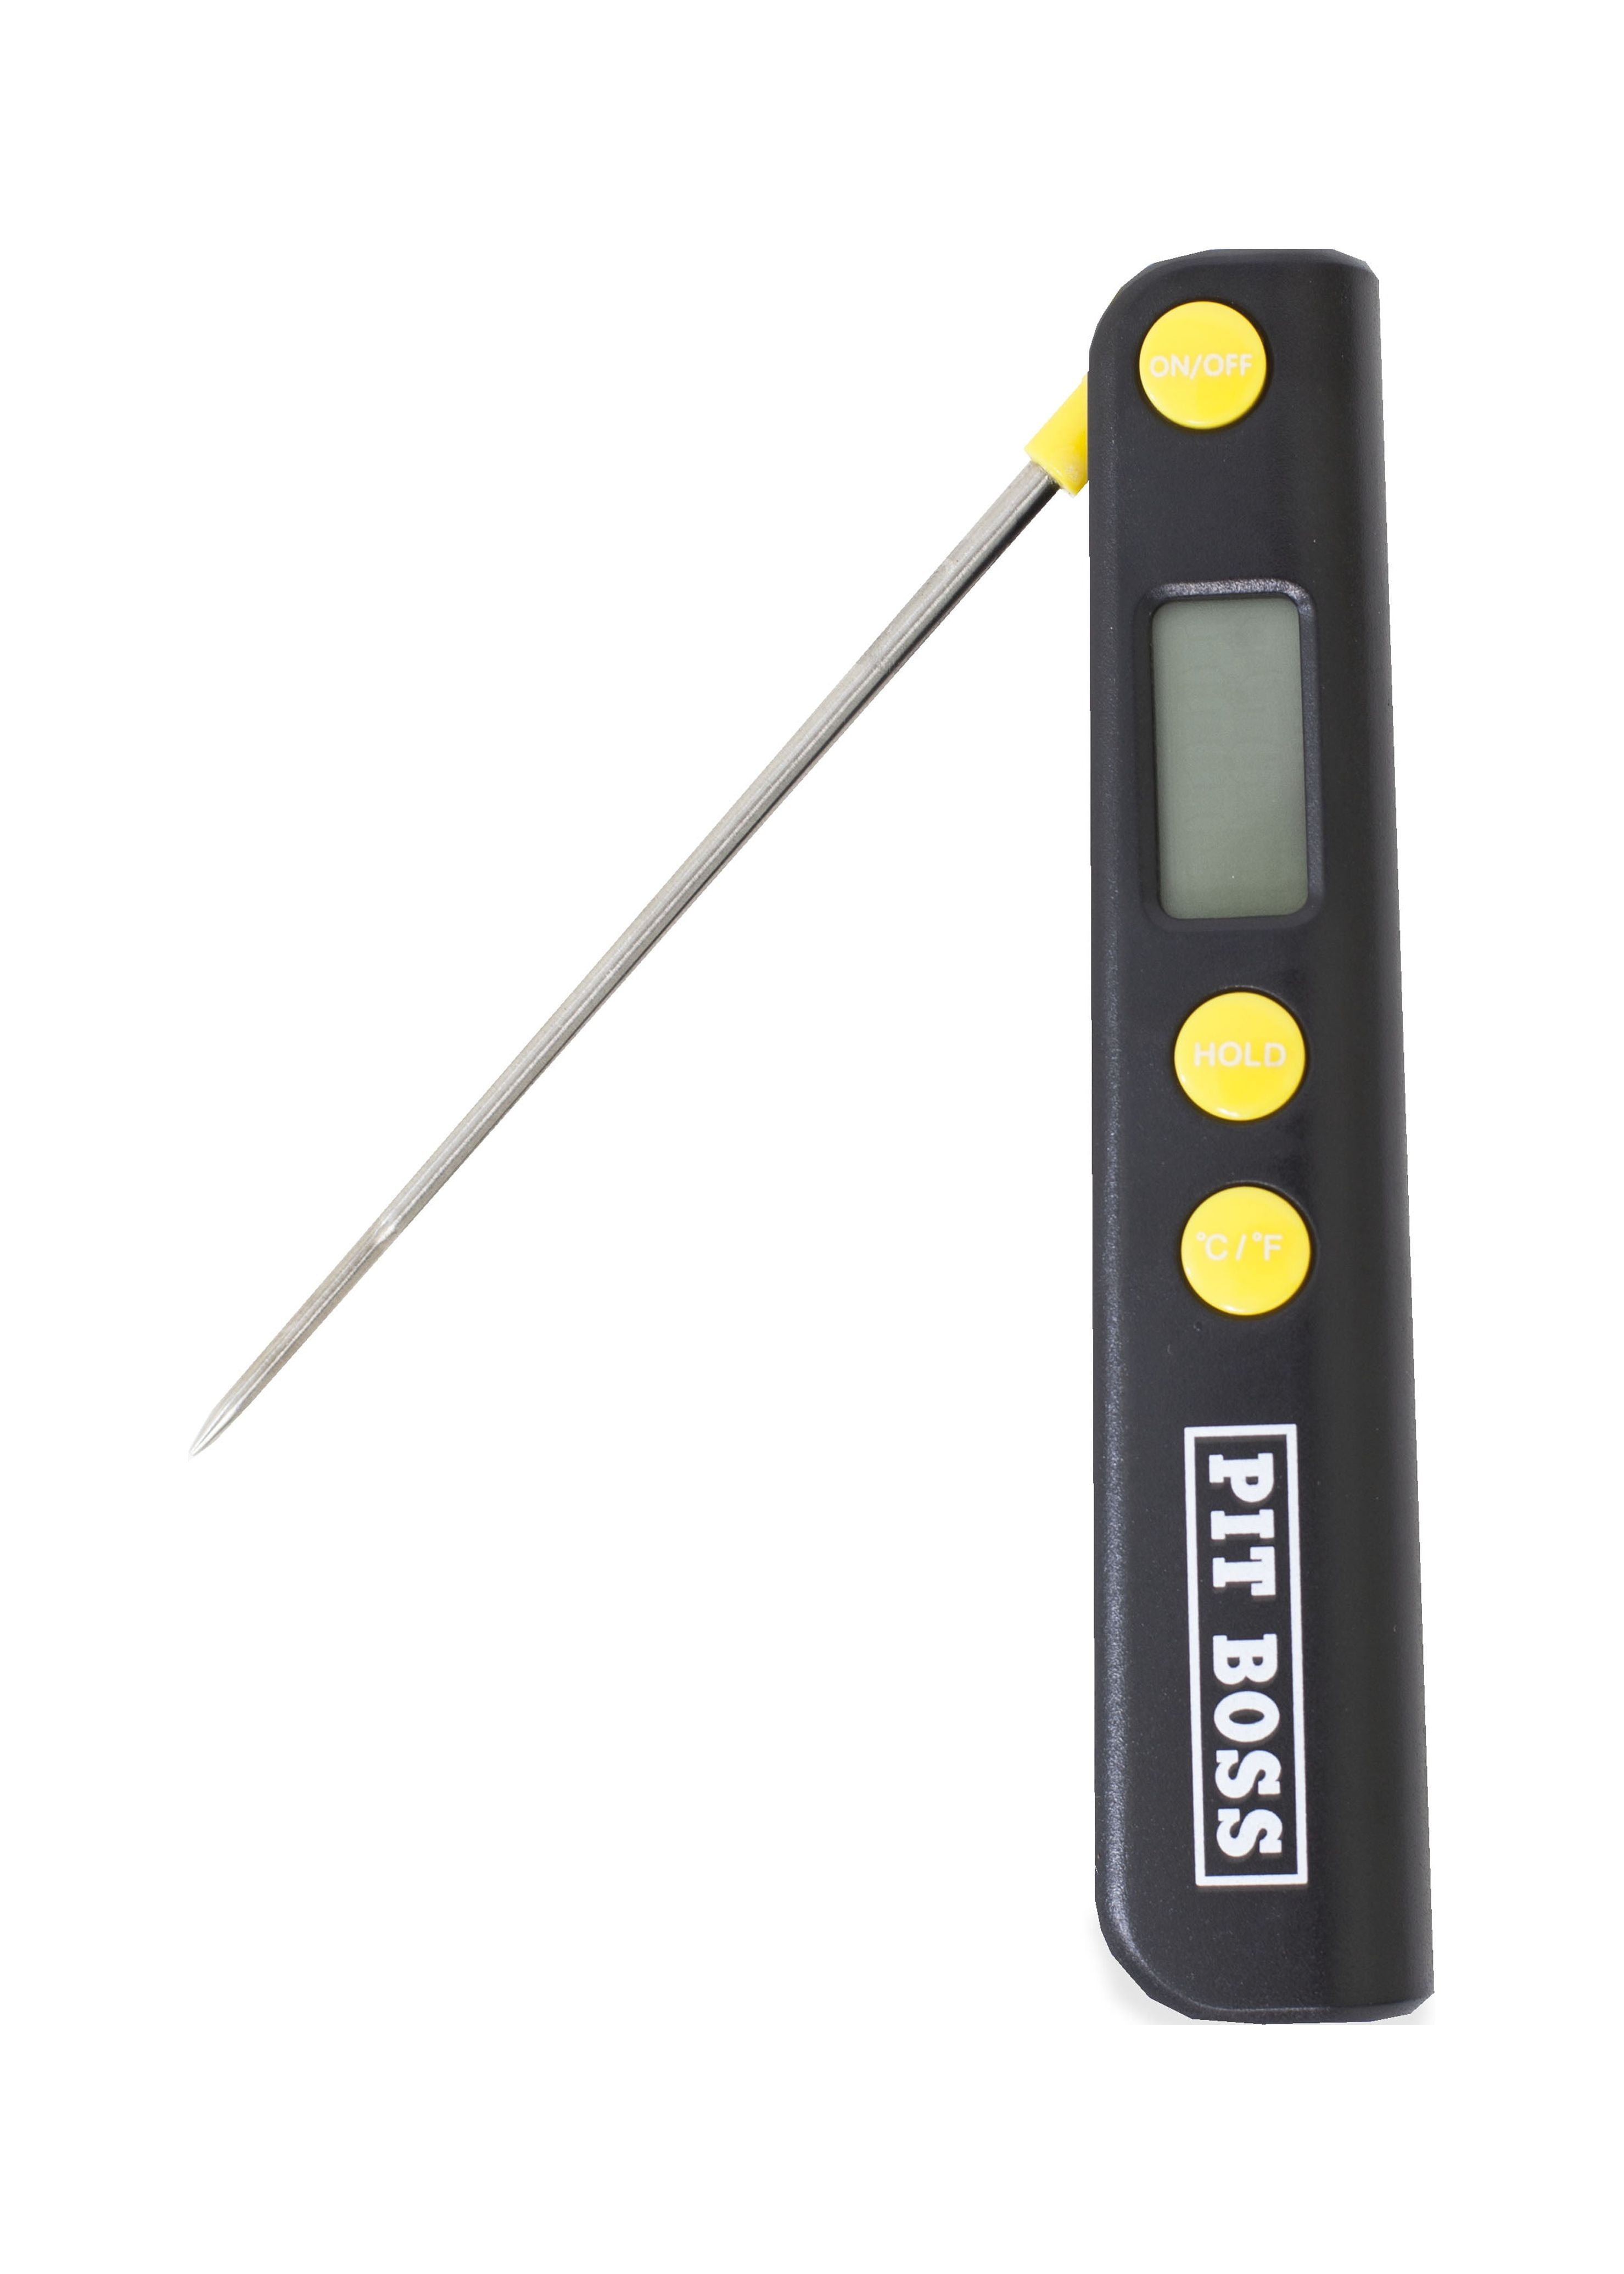 Efeng Digital Meat Thermometer Candy Thermometer Spatula with Pot Clip & 9